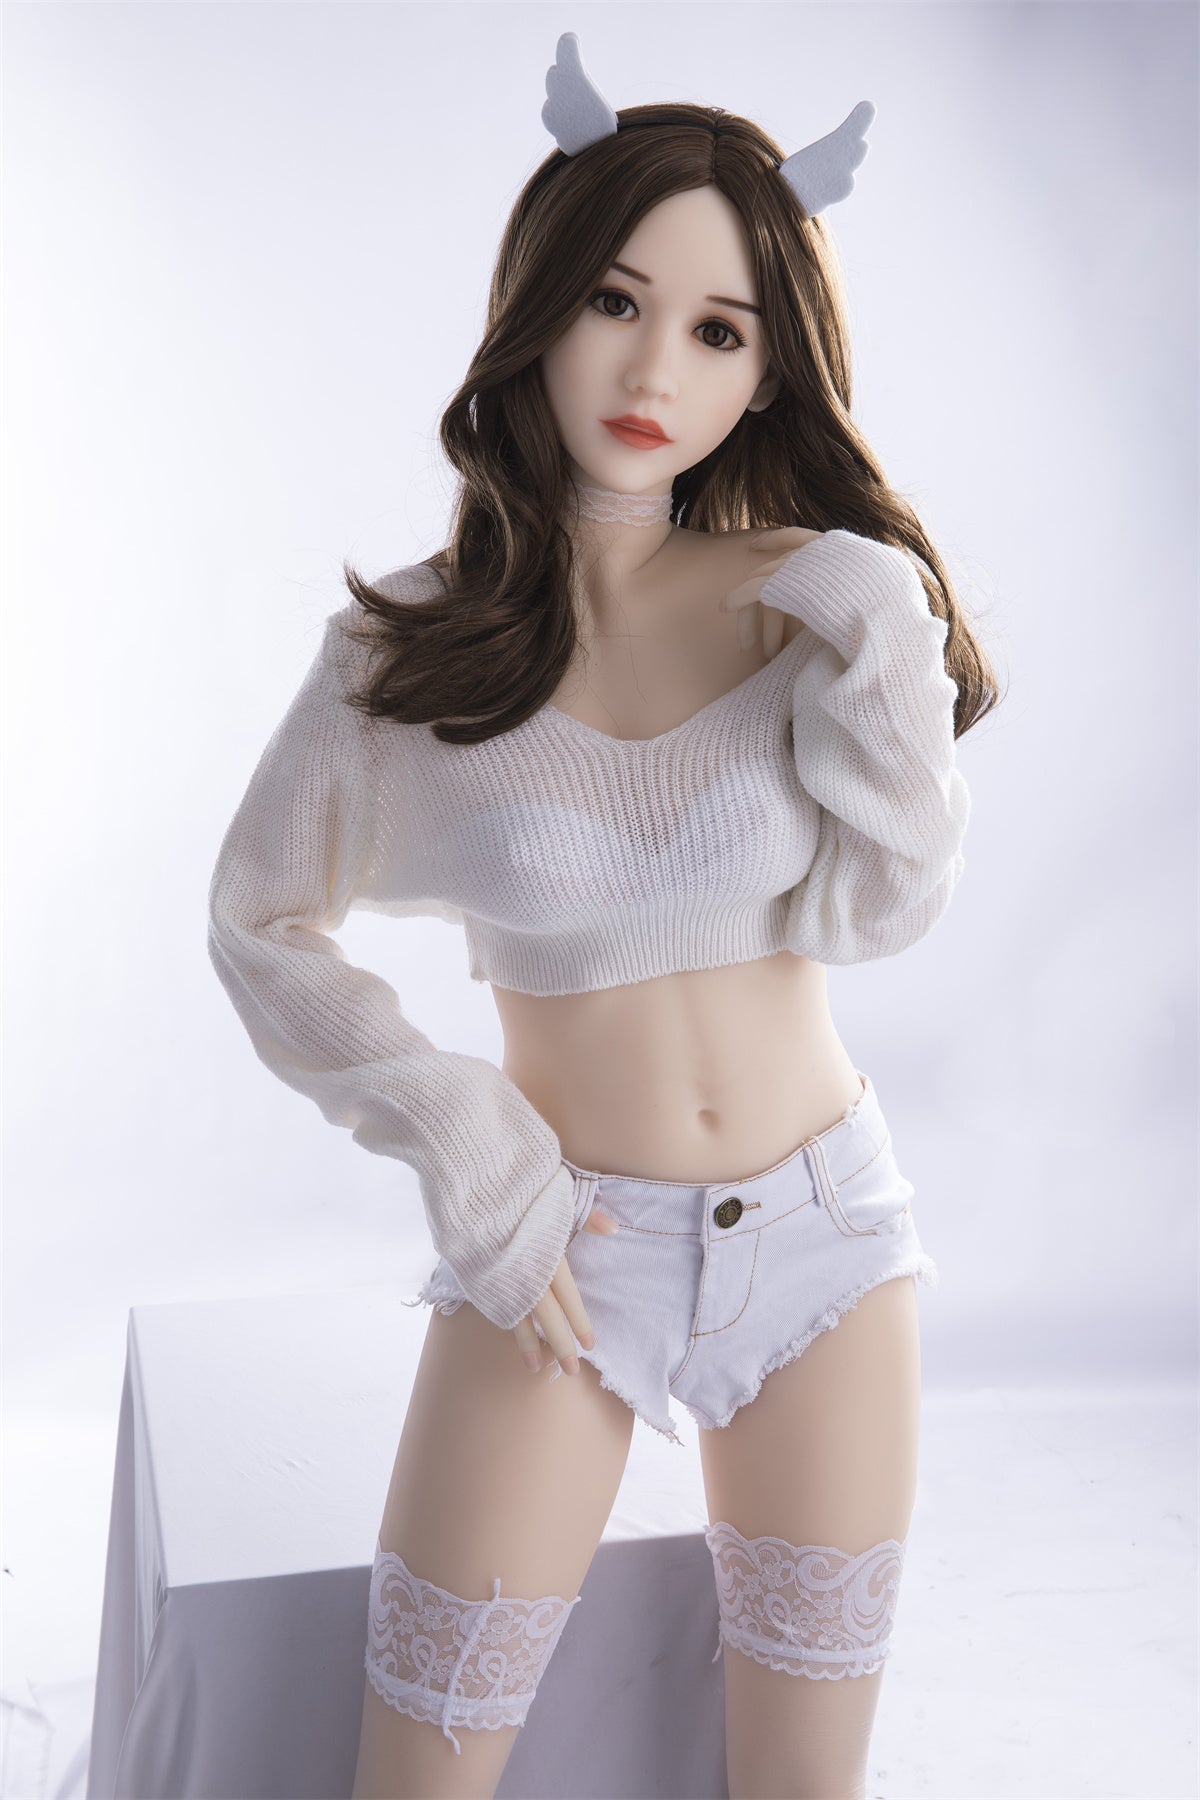 US WAREHOUSE  158cm Medium Breast Sex Doll Young Girl Doll For Sale